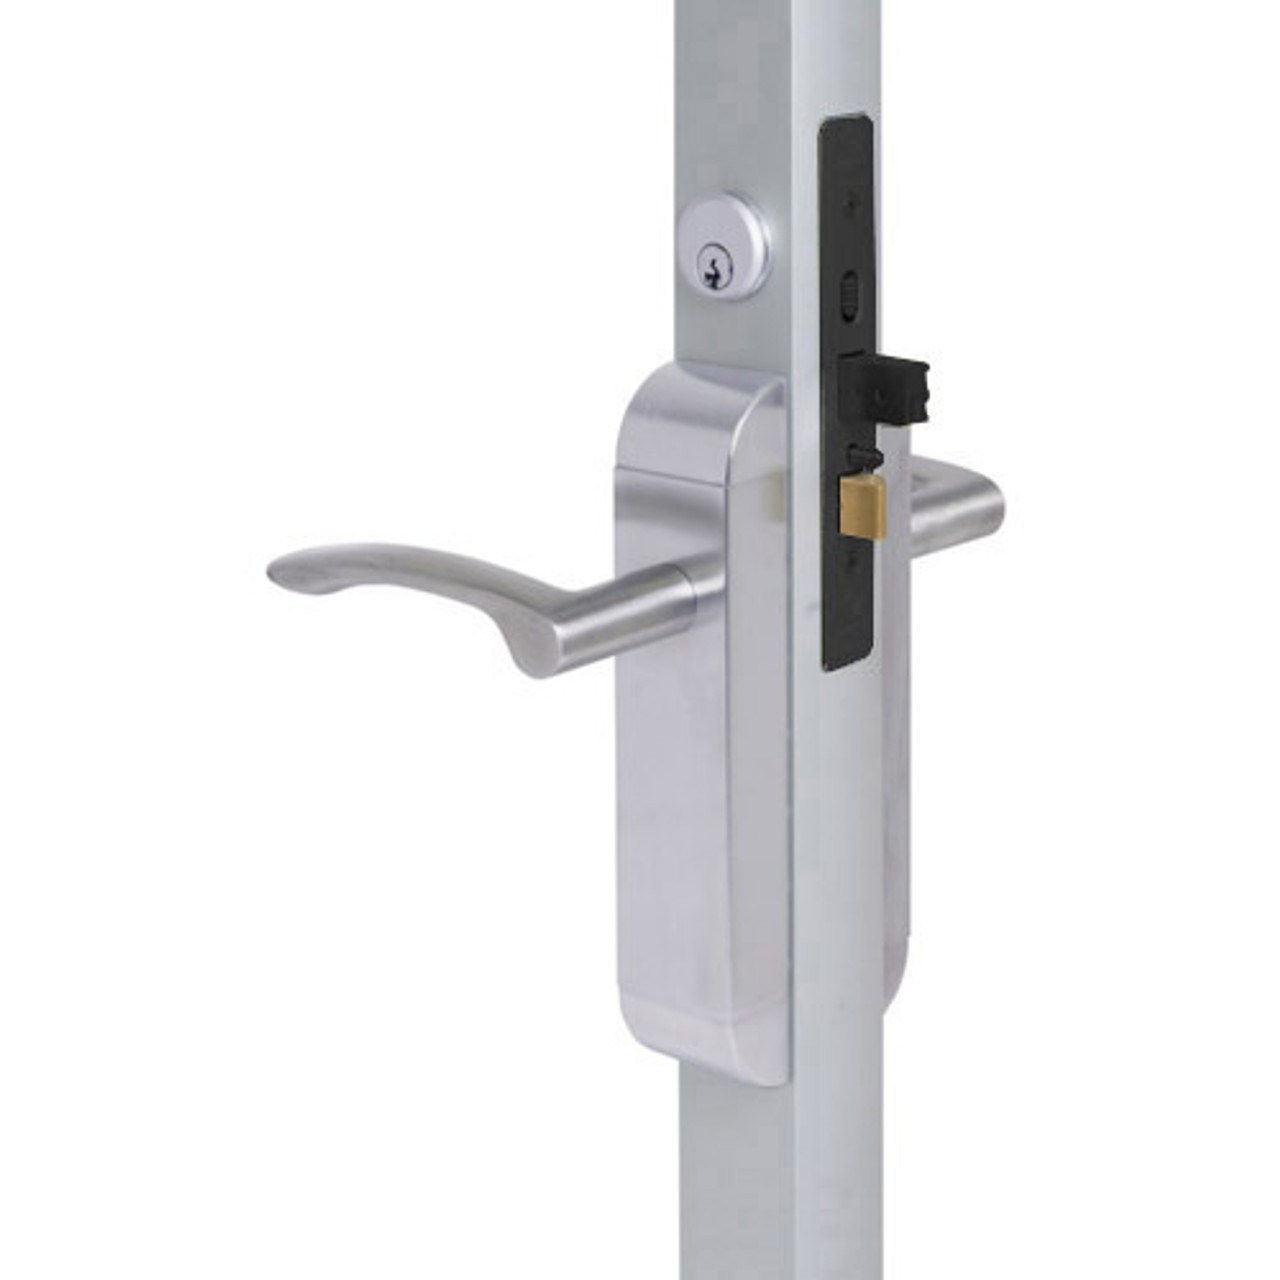 2290-313-103-32 Adams Rite Dual Force Interconnected 2290 series Deadlock/Deadlatch in Bright Stainless